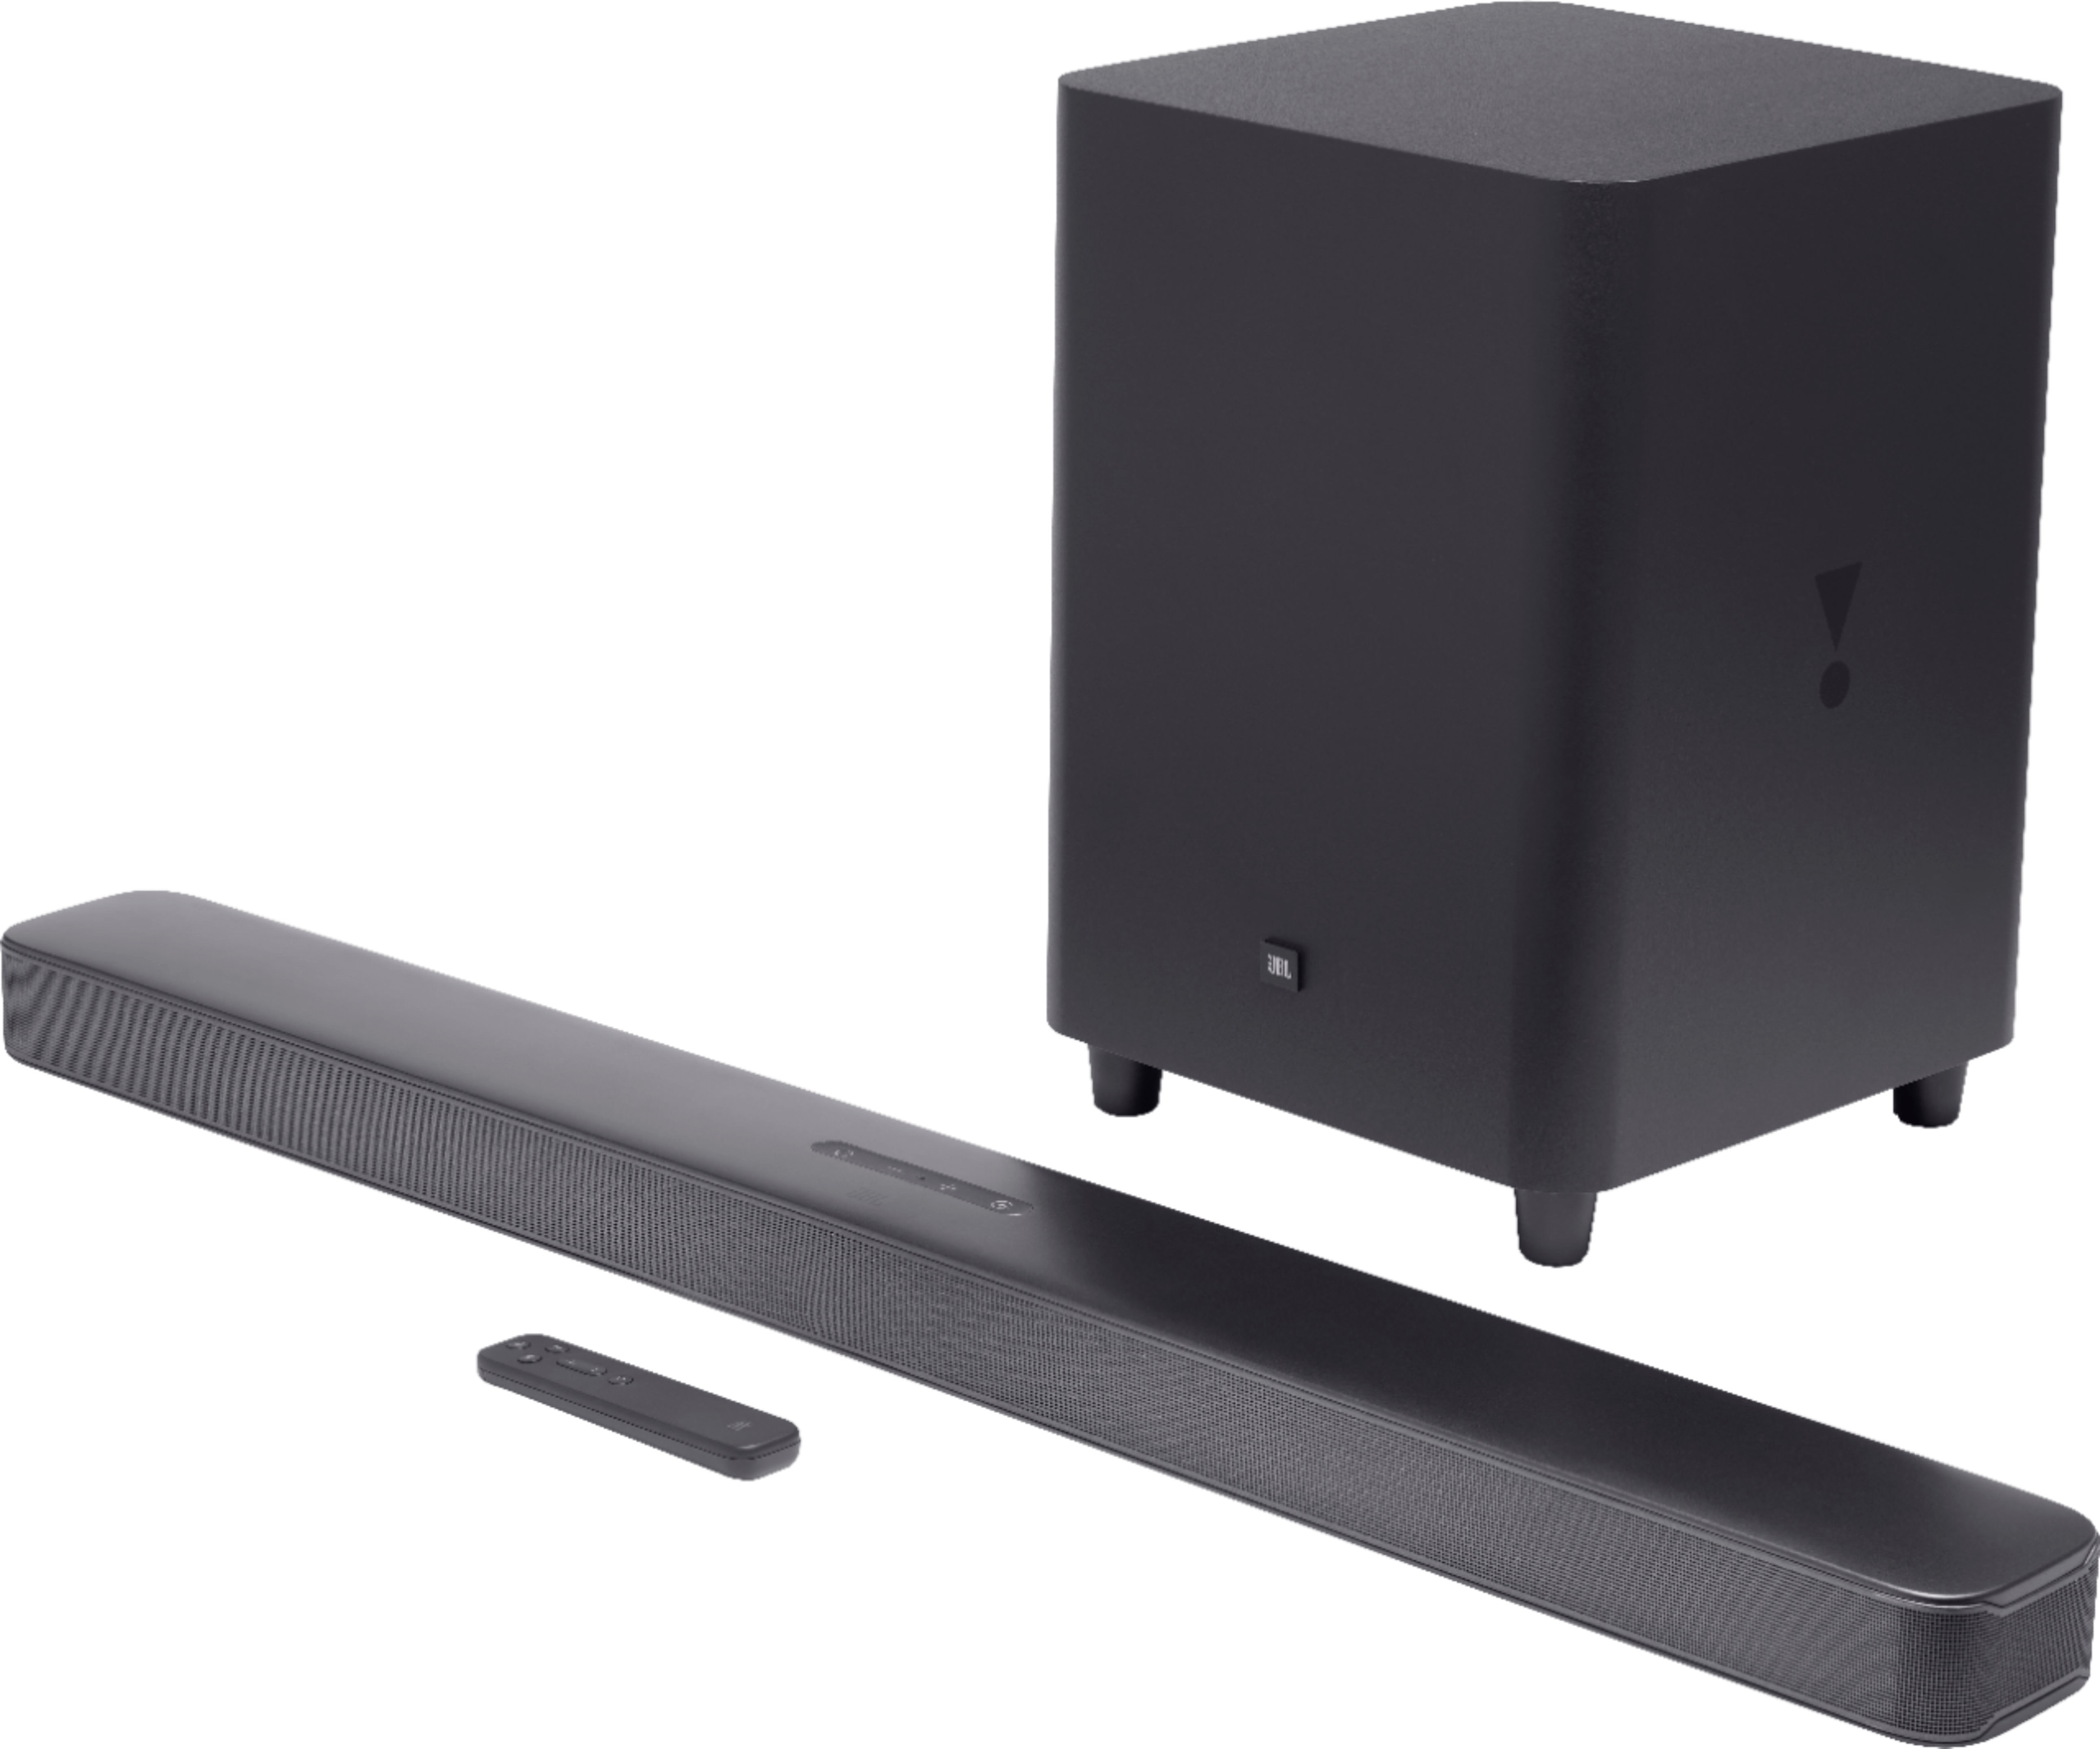 Some top notch deals are still available on great TVs and Soundbars. e896dabb image